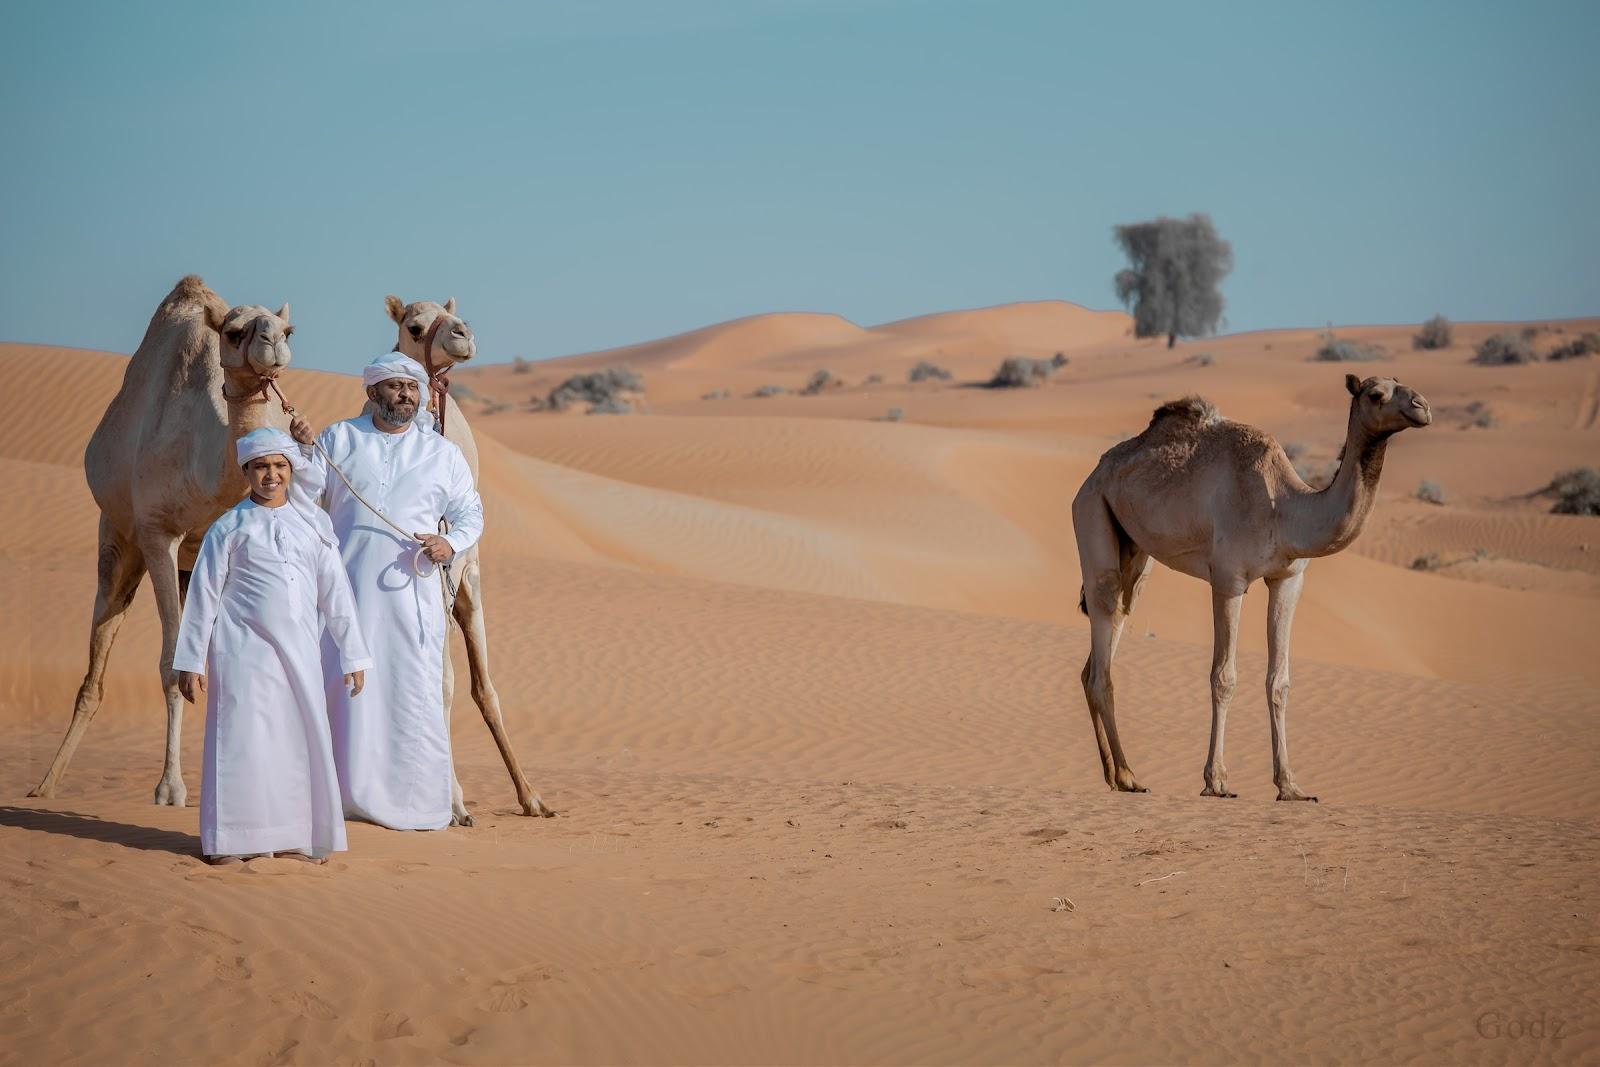 3 Camels and their handlers in a dessert in the UAE.